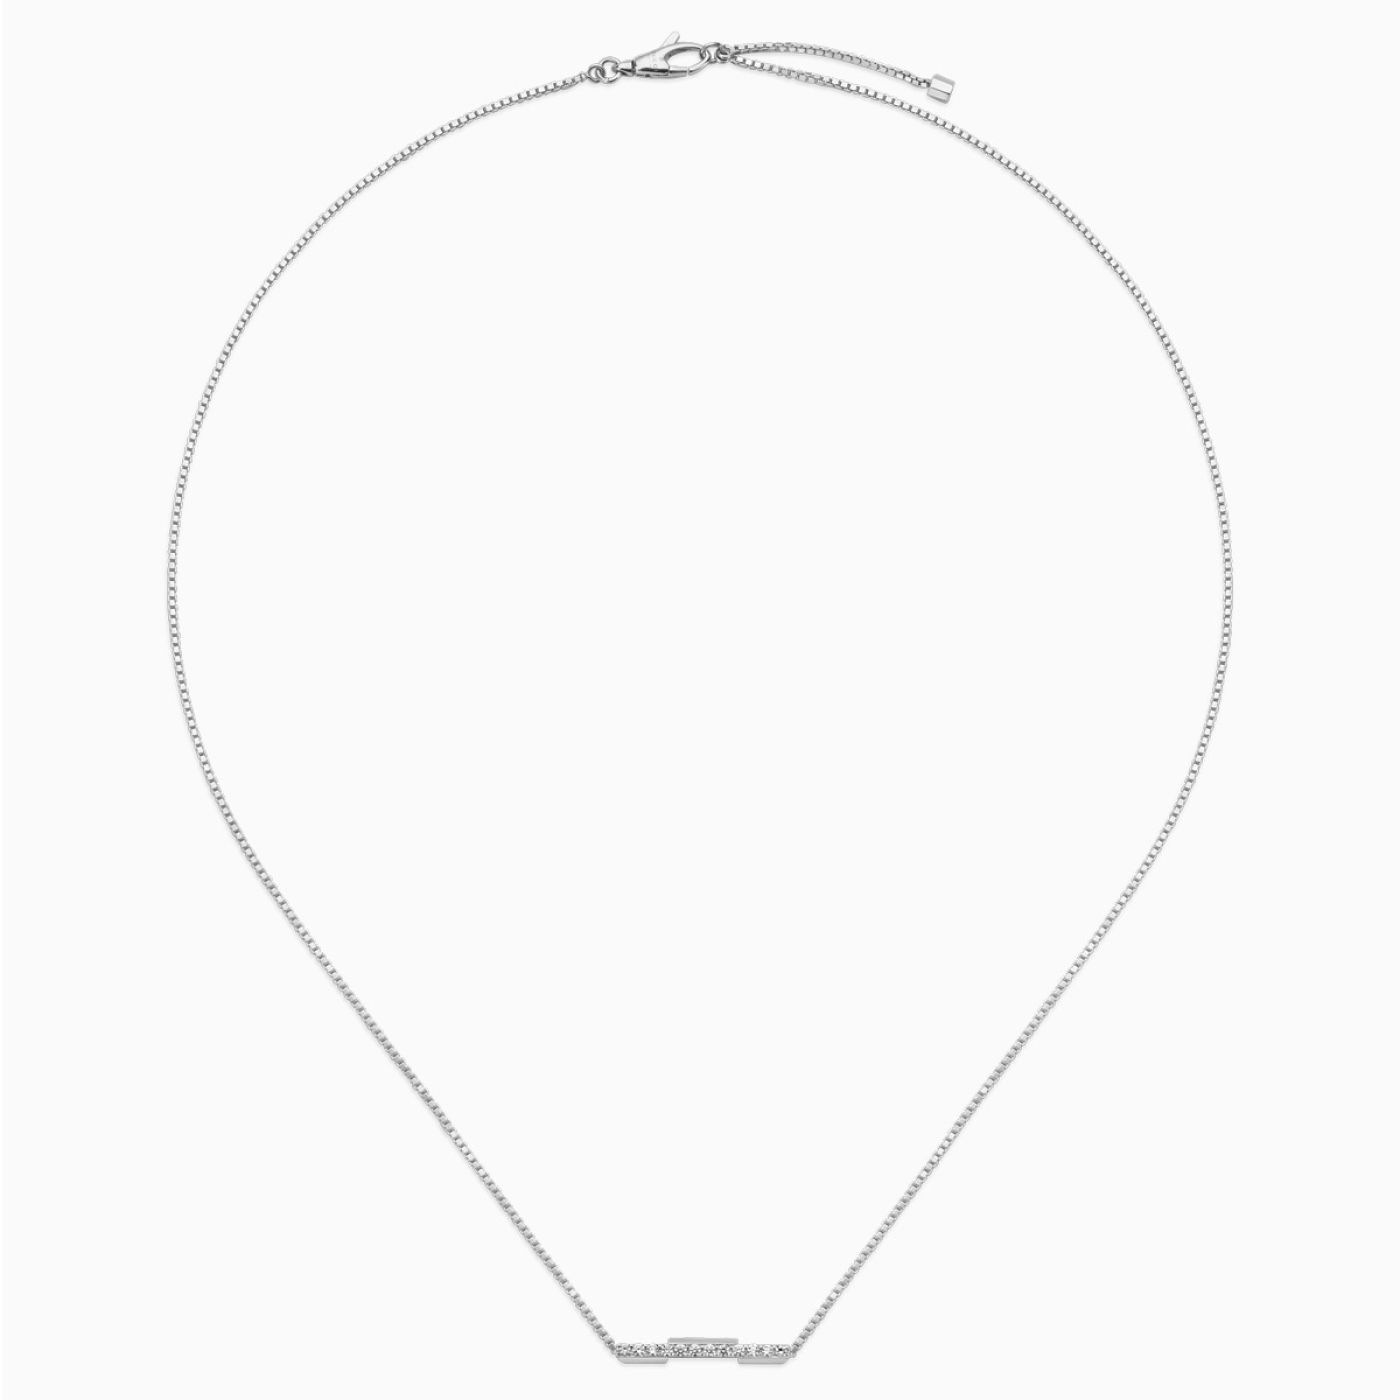 Necklace Gucci Link to Love white gold and diamonds